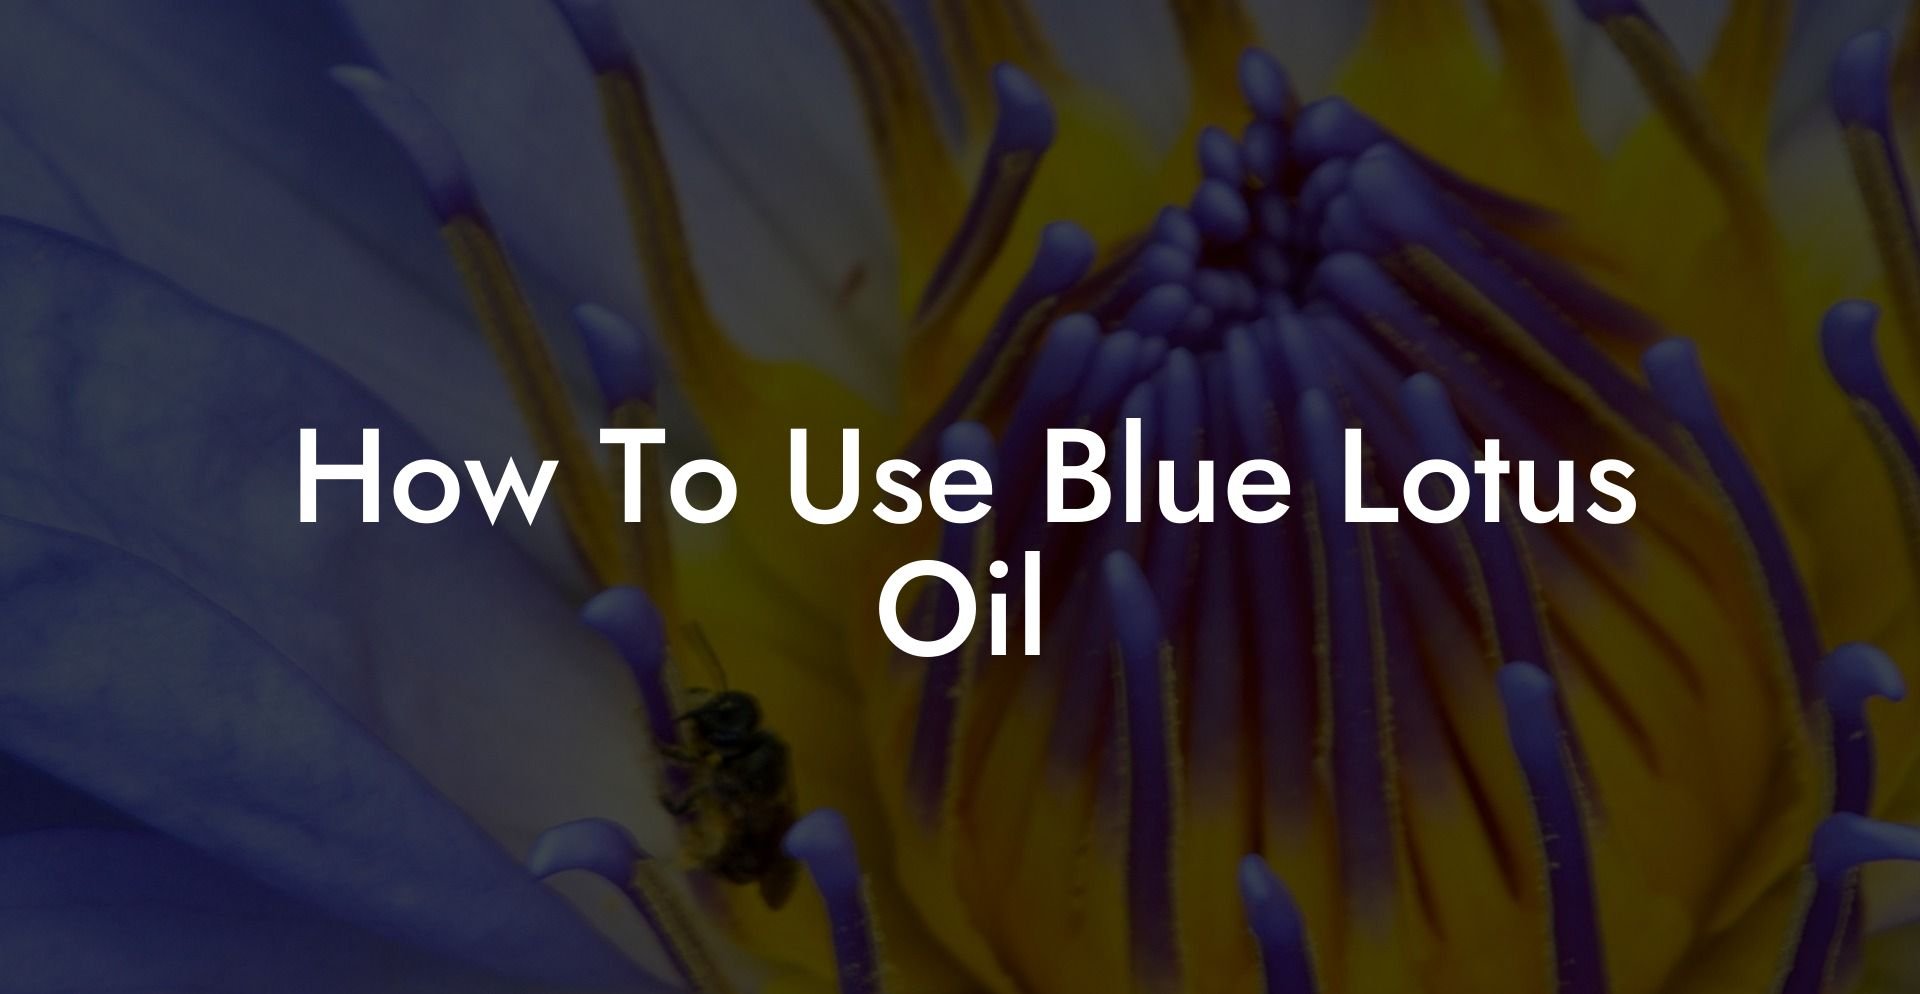 How To Use Blue Lotus Oil